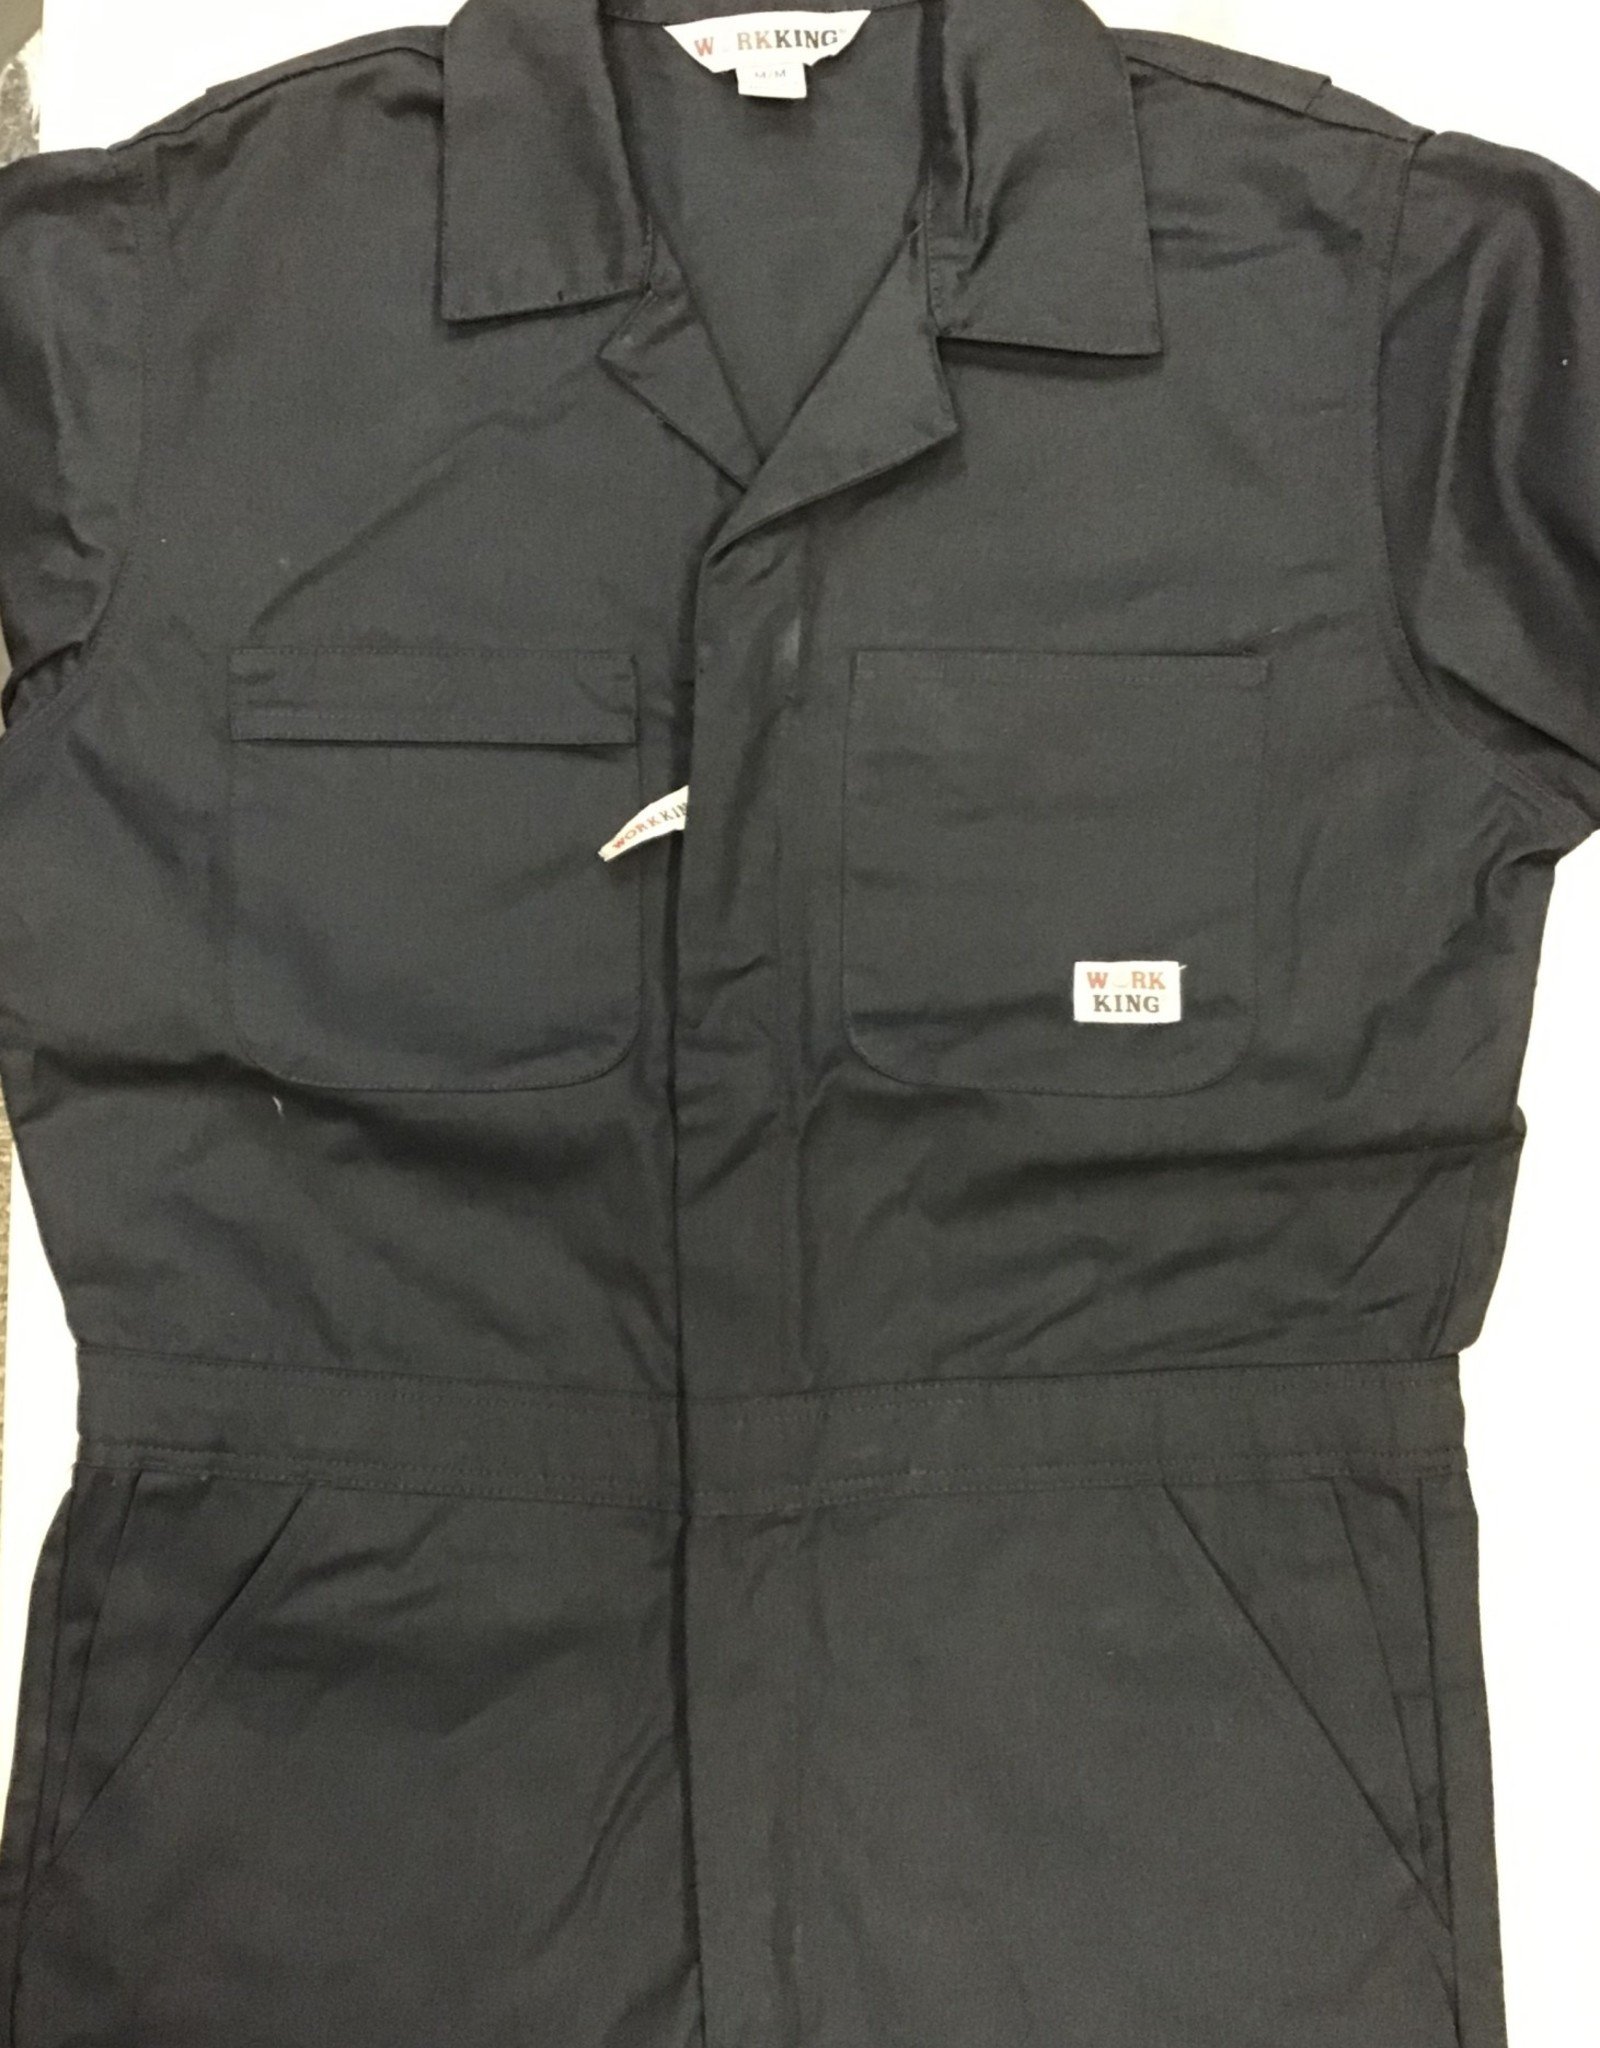 Work King Work King I063 Unlined Coverall Men's